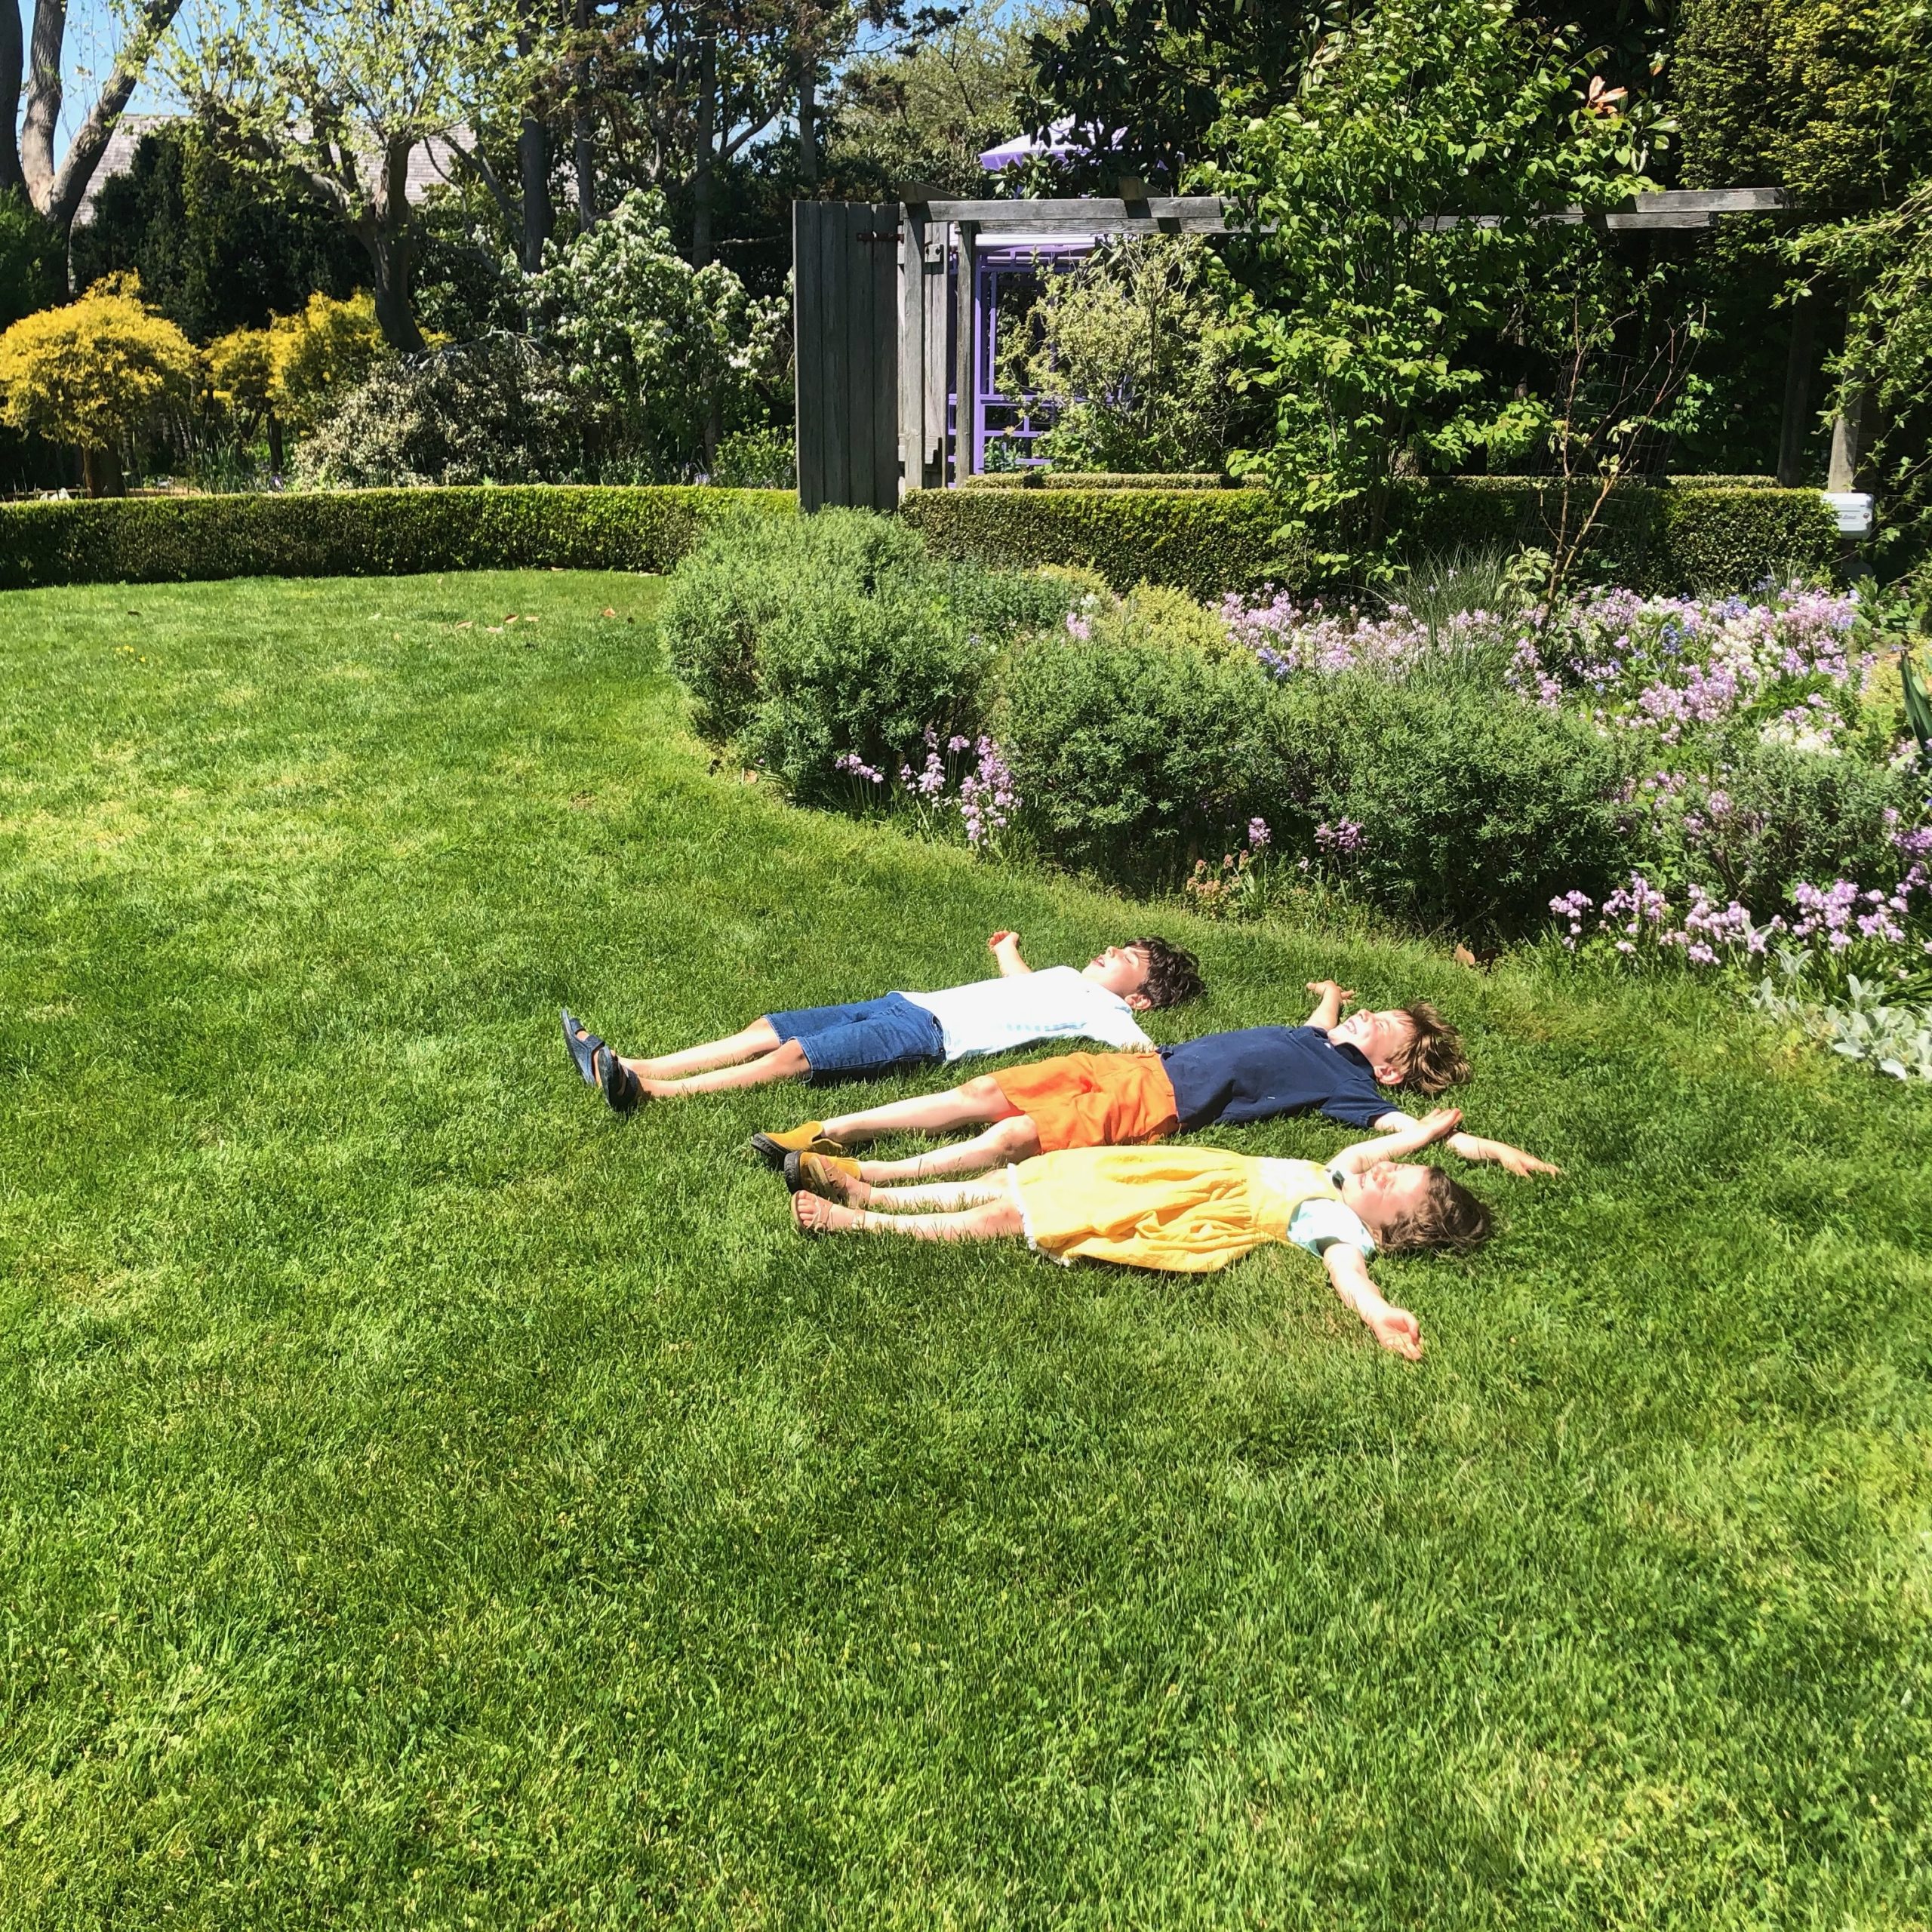 Landscaper Taylor Pollio lets his kids play safely on a completely chemical free lawn at The Madoo Conservancy in Sagaponack.